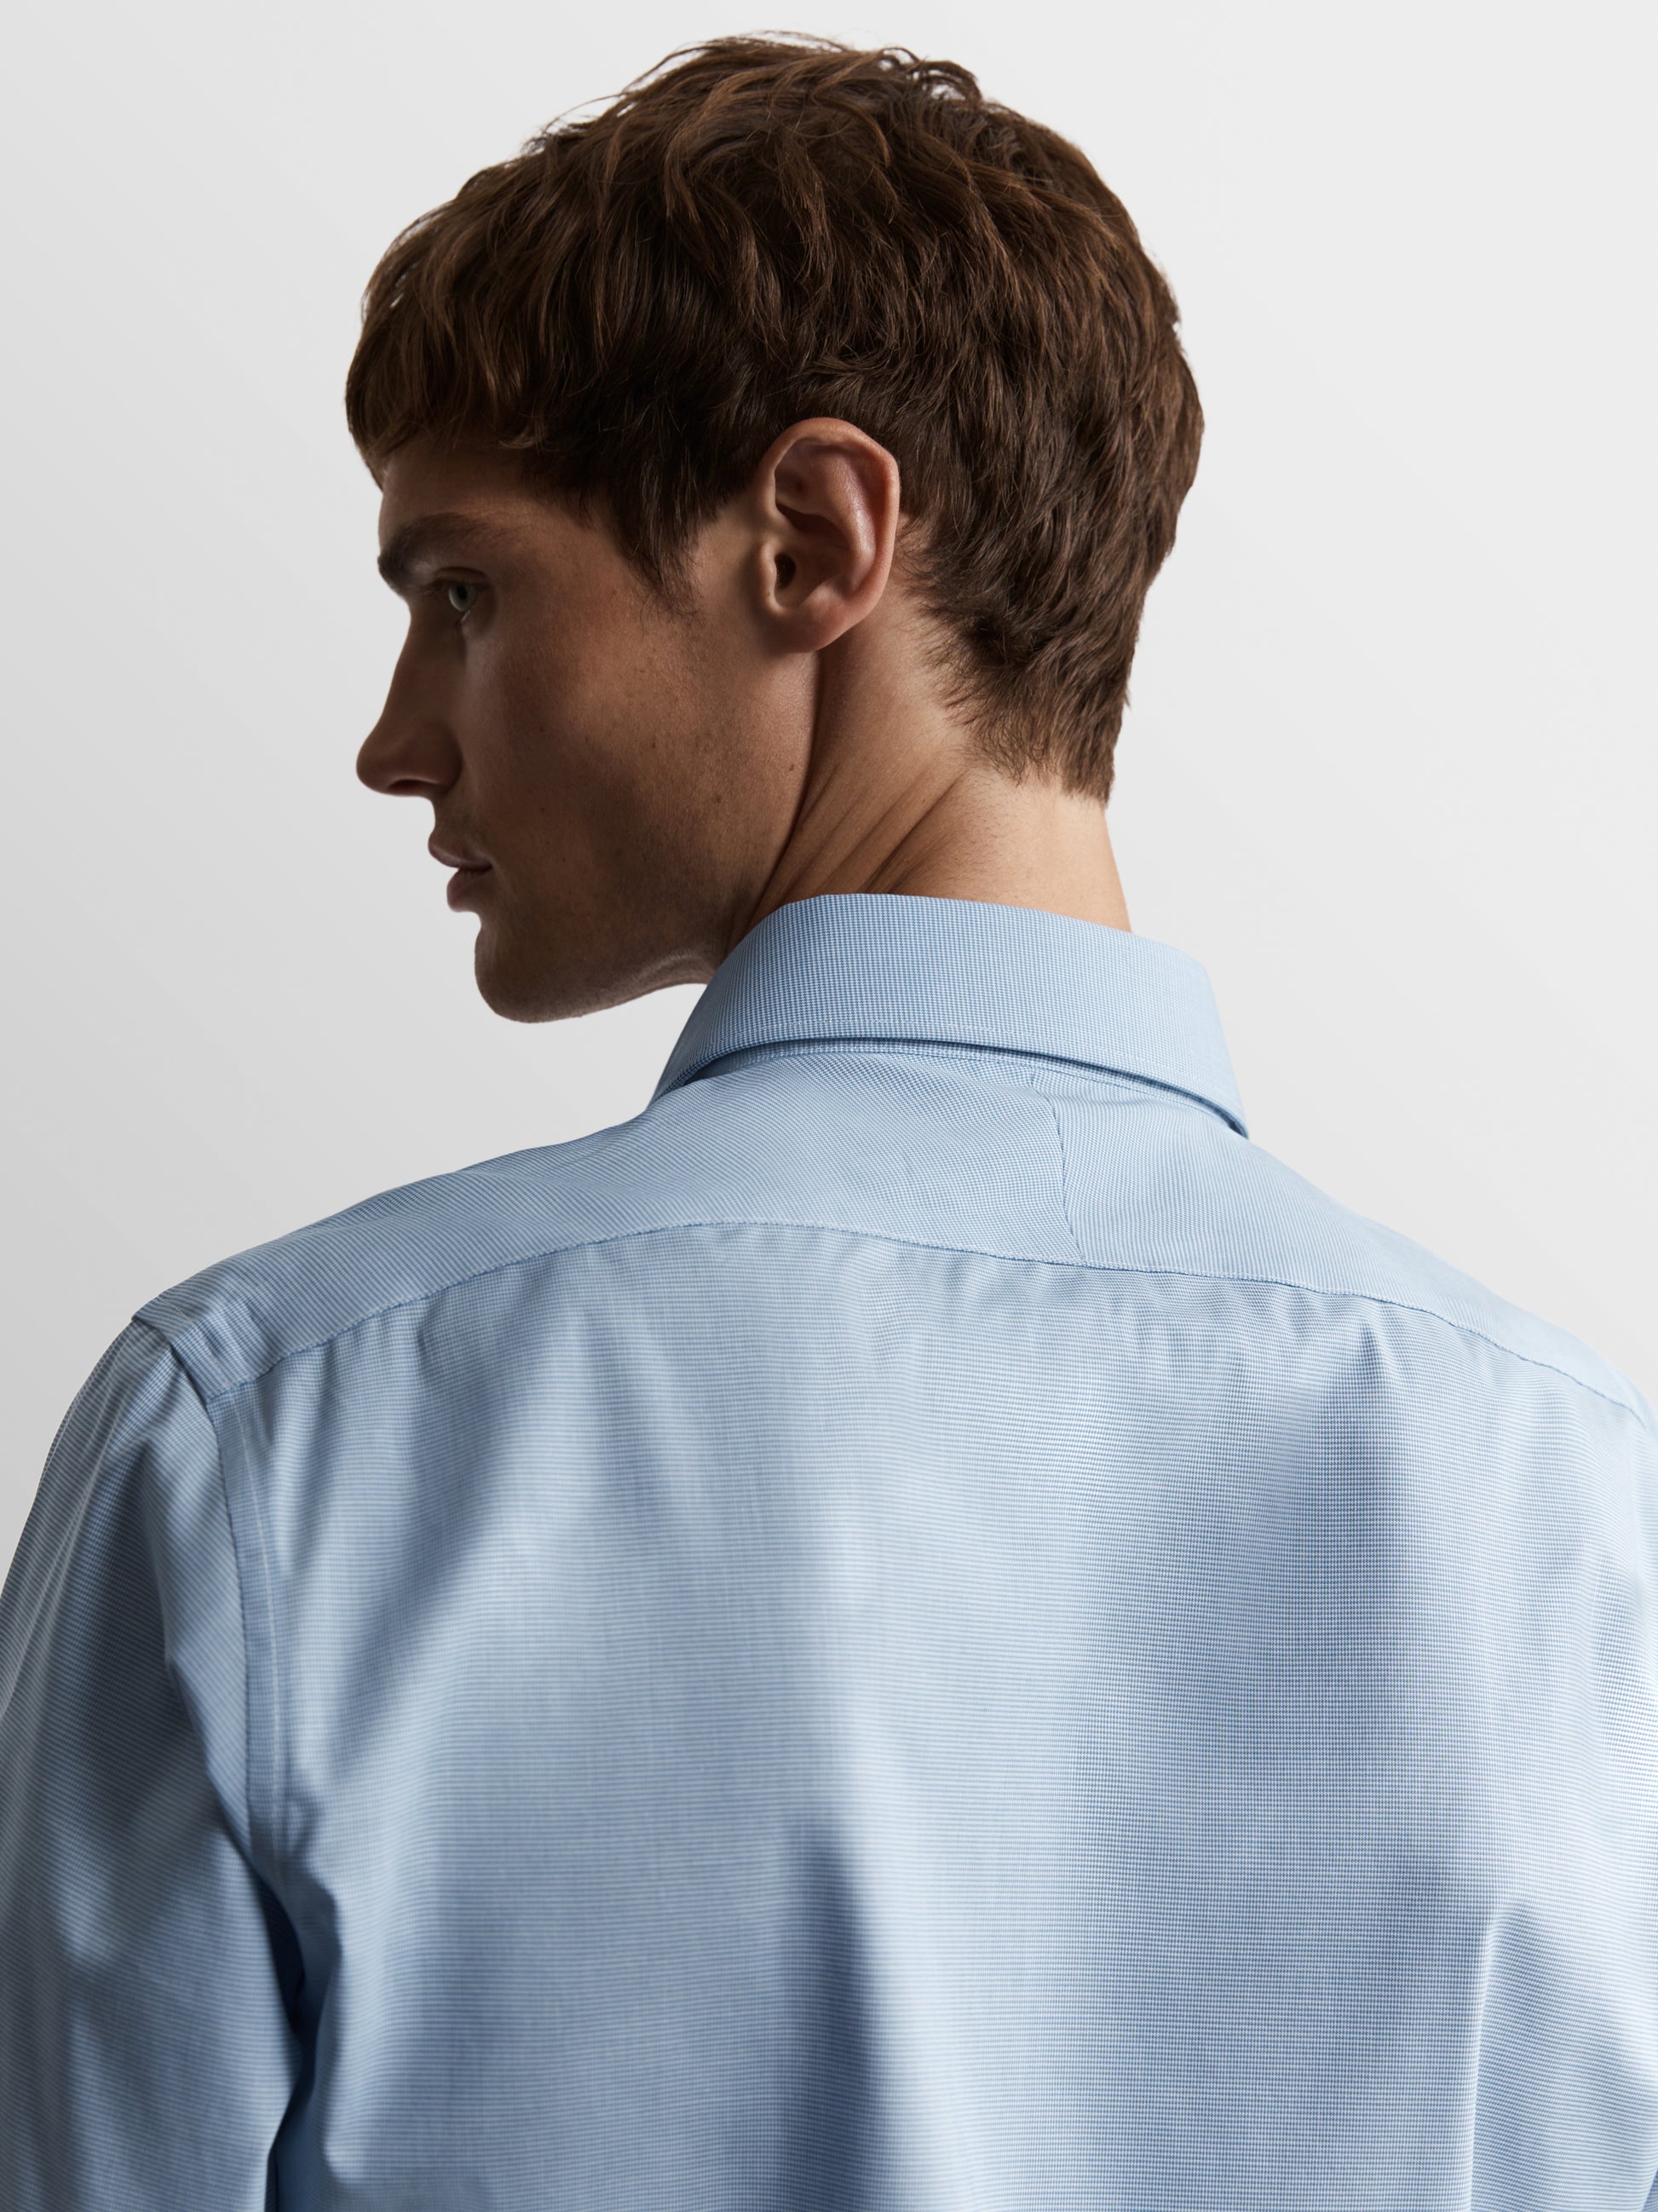 Image 3 of Max Performance Blue Puppytooth Plain Weave Slim Fit Single Cuff Classic Collar Shirt